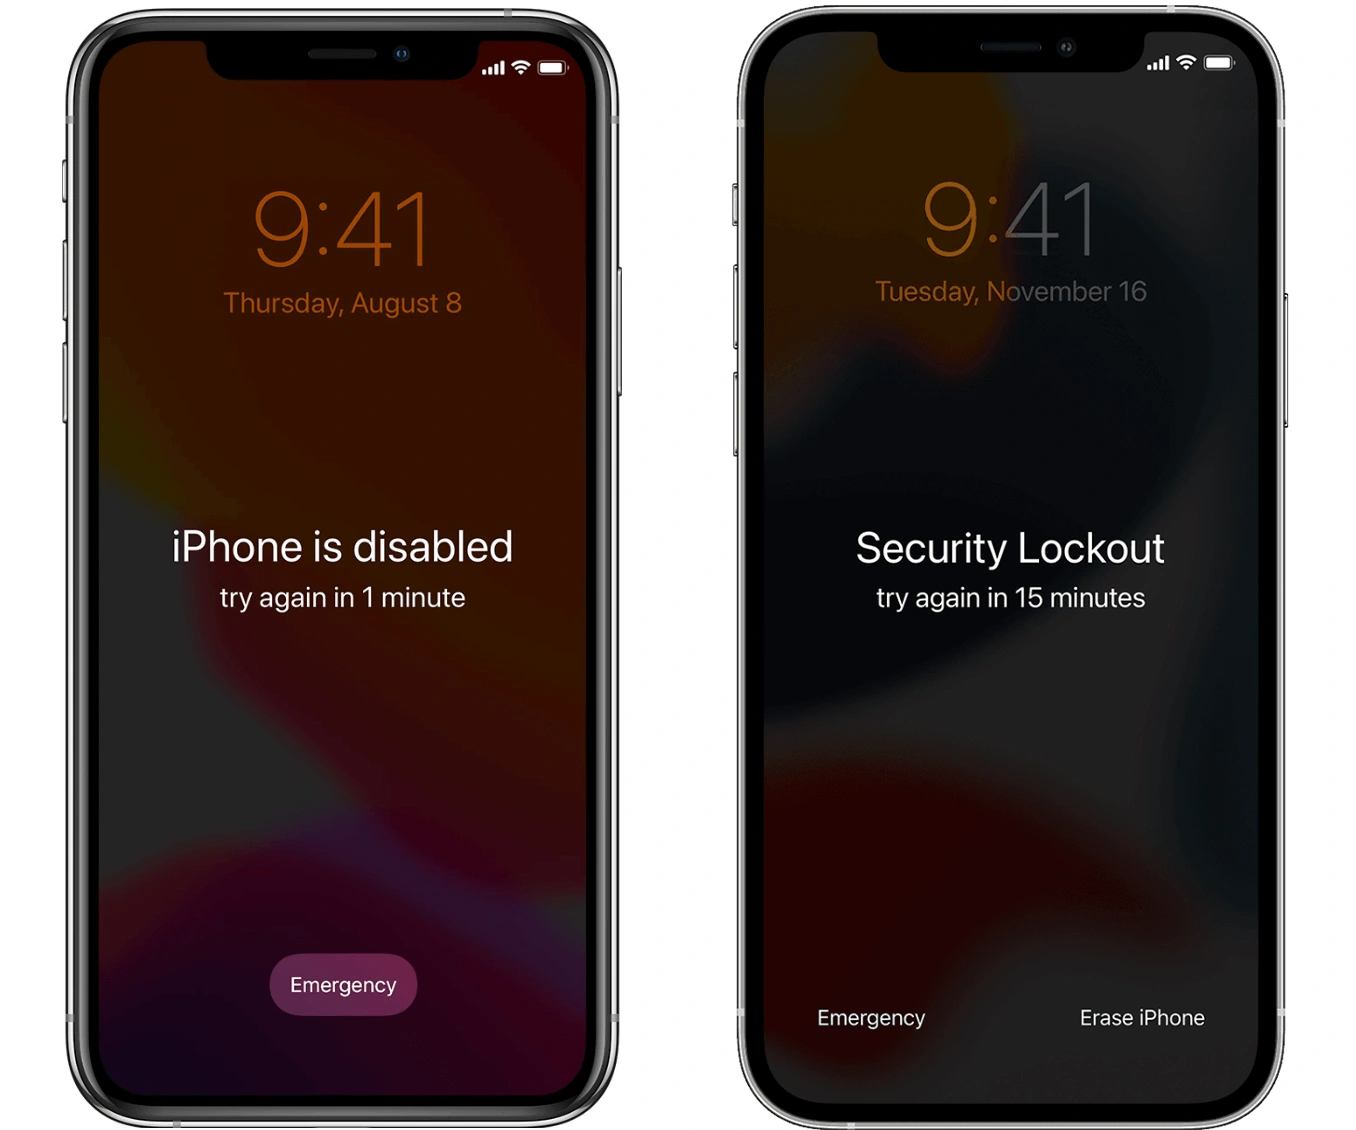 iPhone Disabled vs iPhone Security Lockout